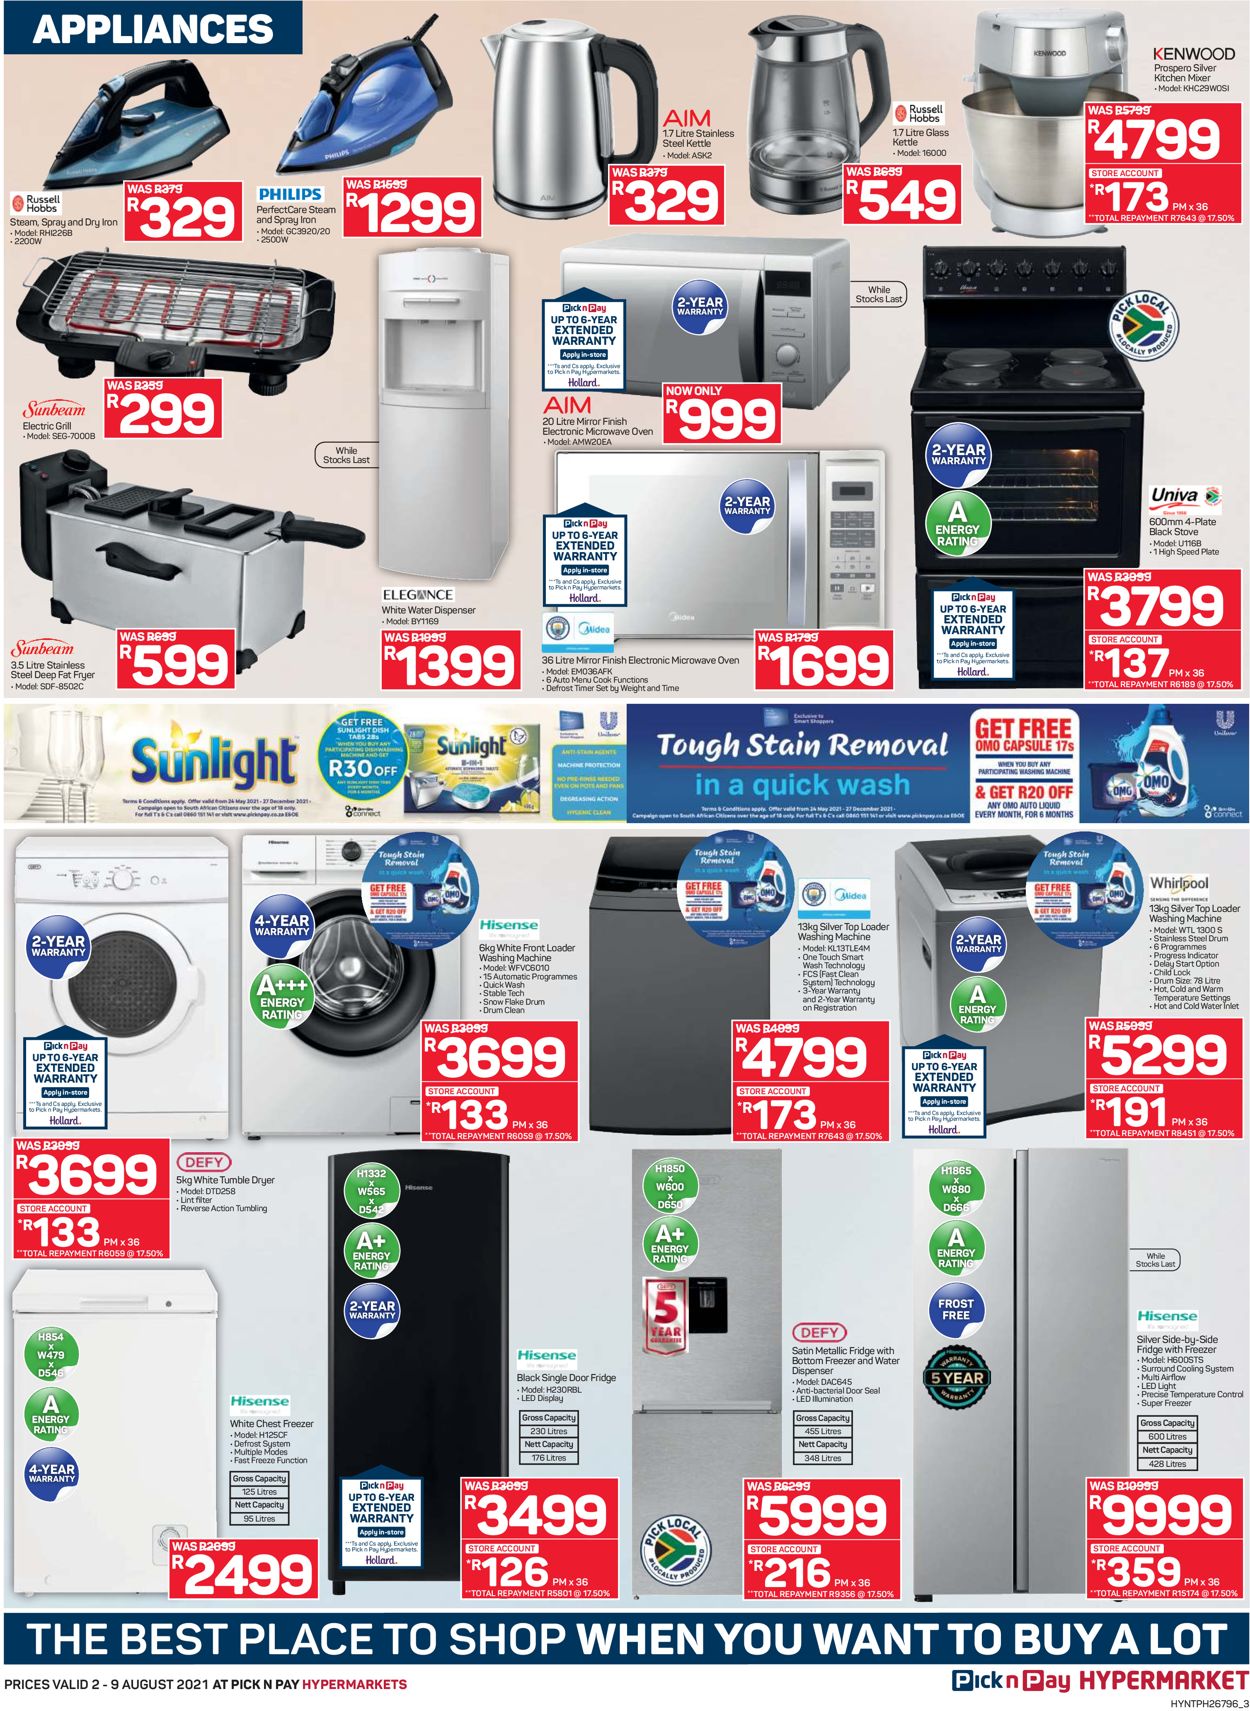 Pick n Pay Catalogue - 2021/08/02-2021/08/09 (Page 3)